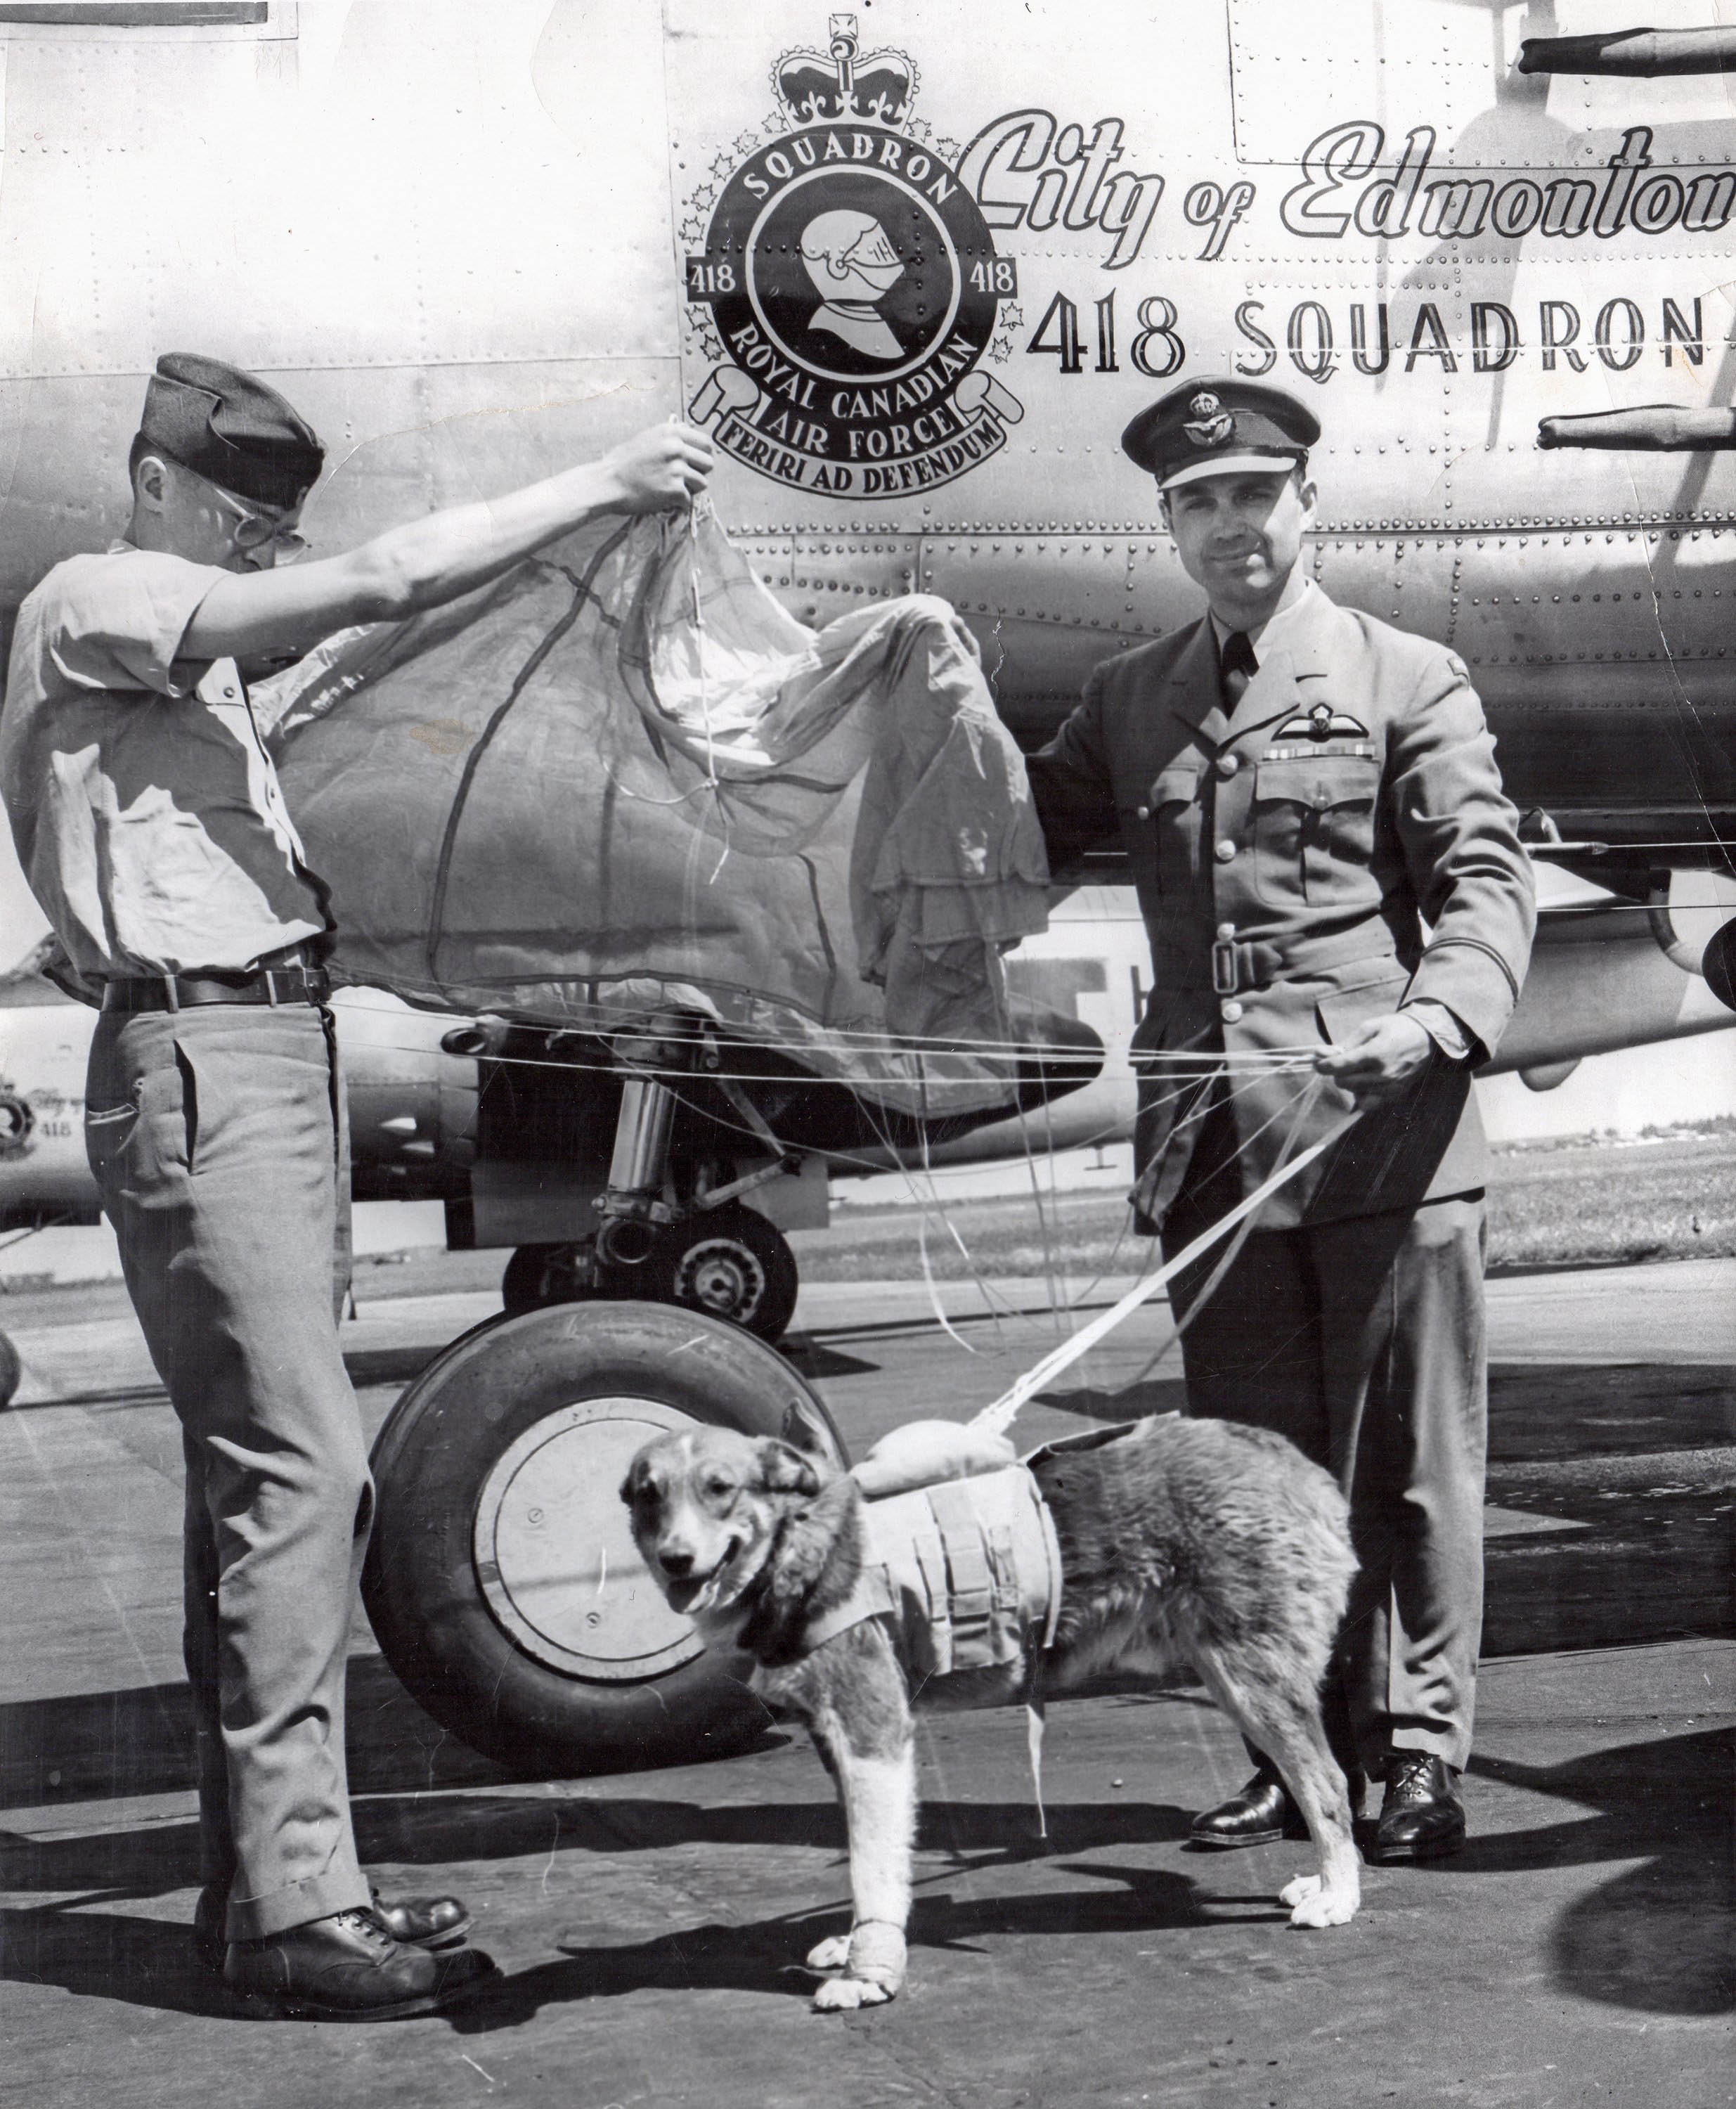 418 Squadron members display Butch, the dog's specially made paraschute